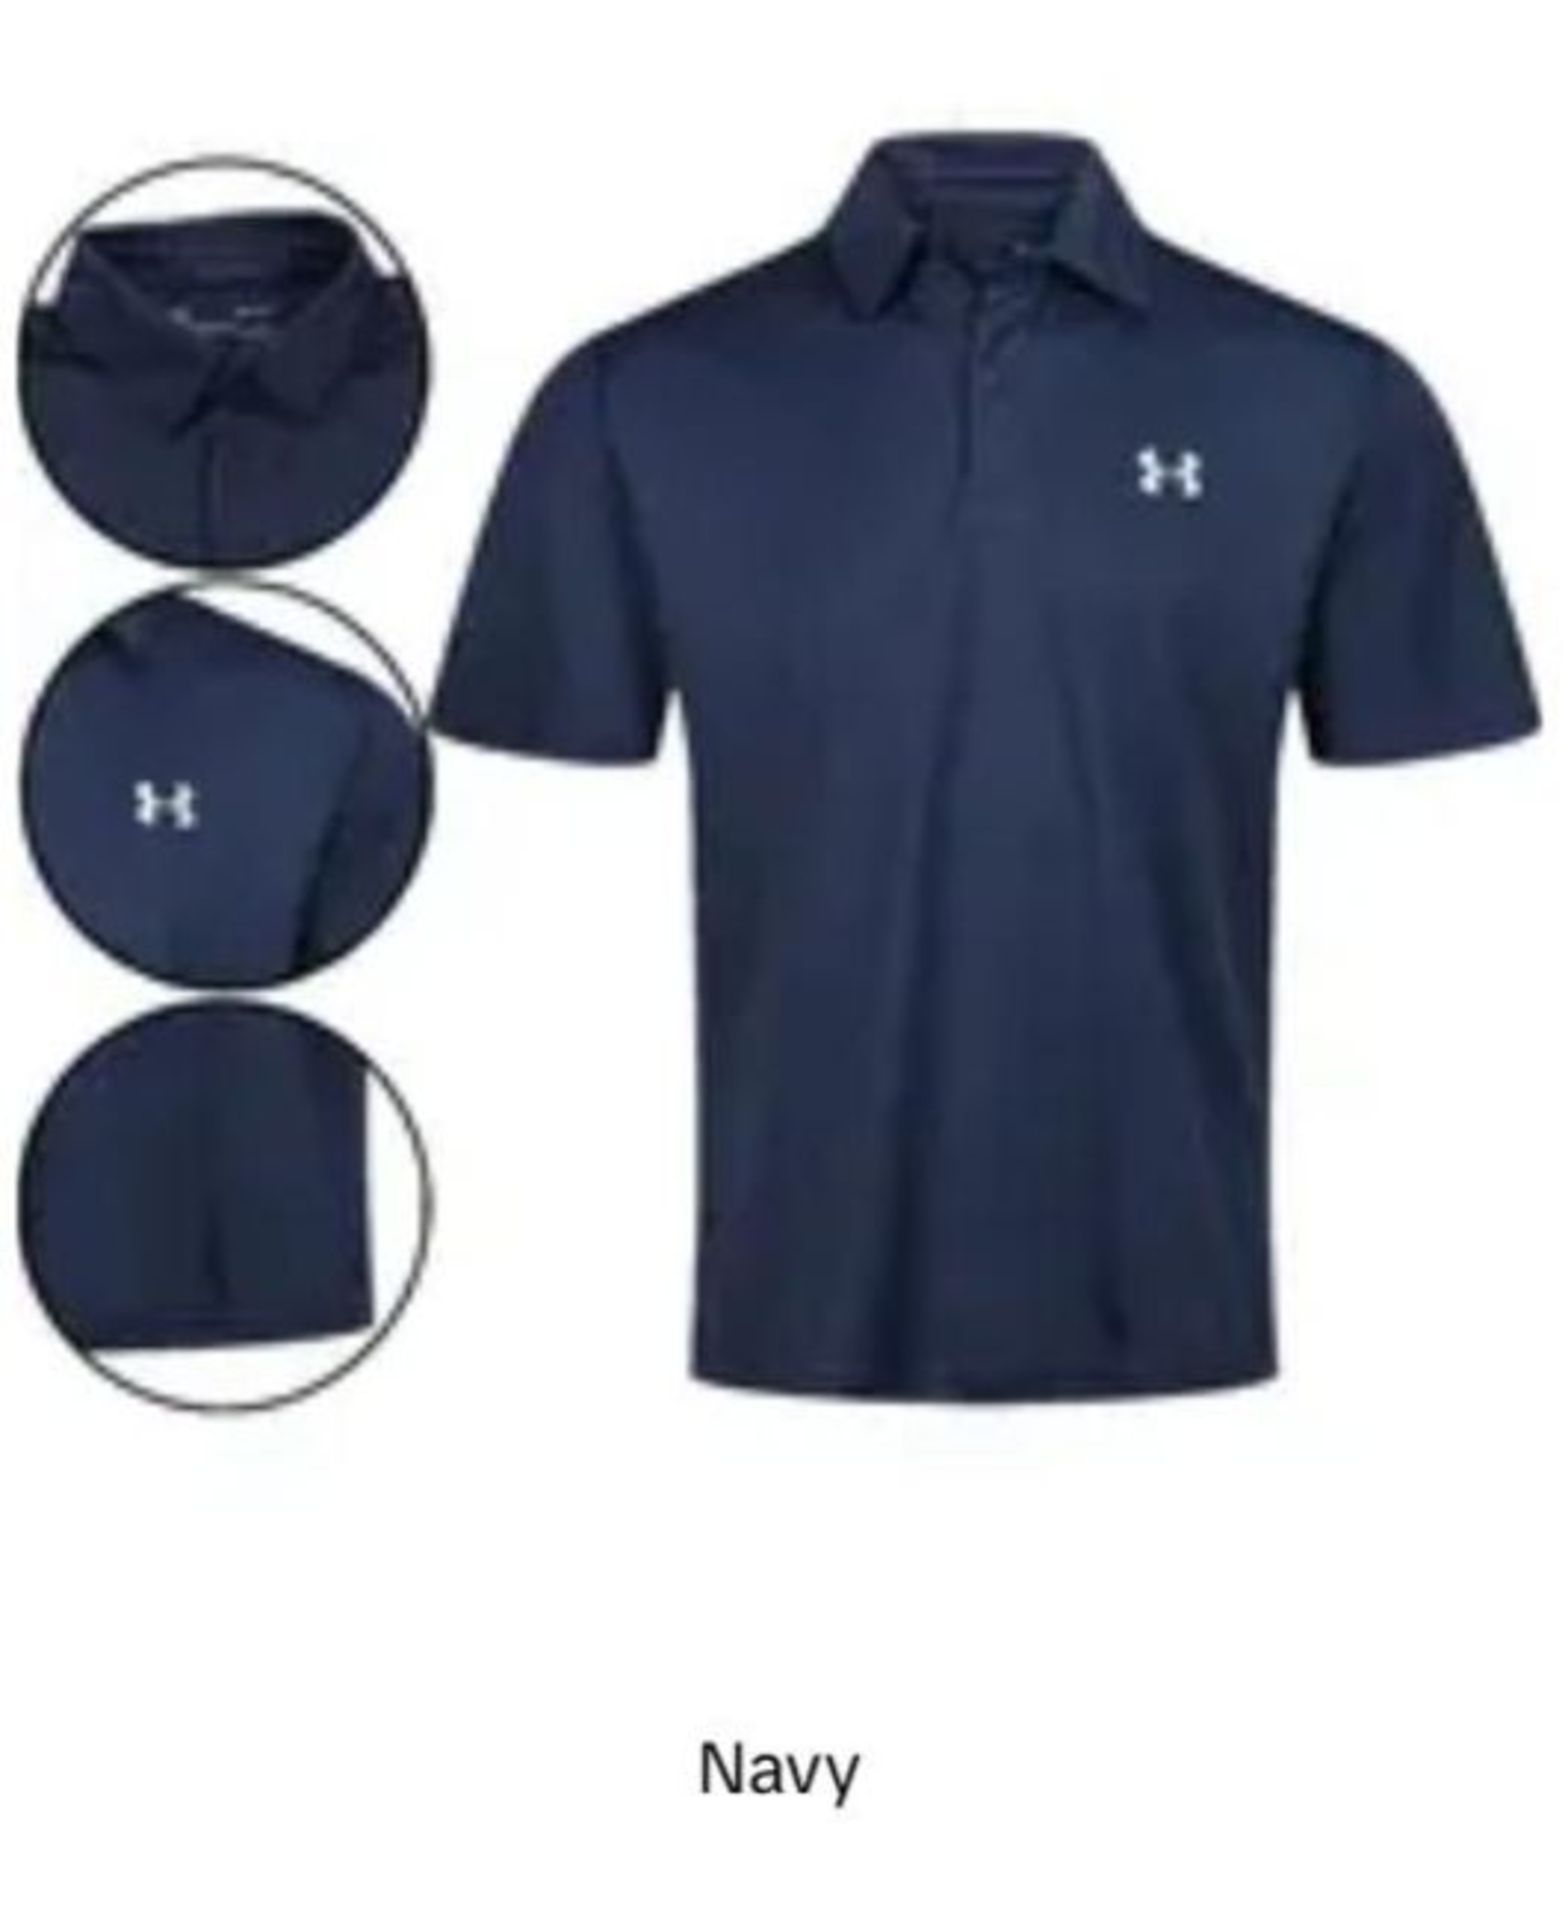 Mens Breathable Under Armour Polo Shirt Navy Size XL - Image 2 of 3